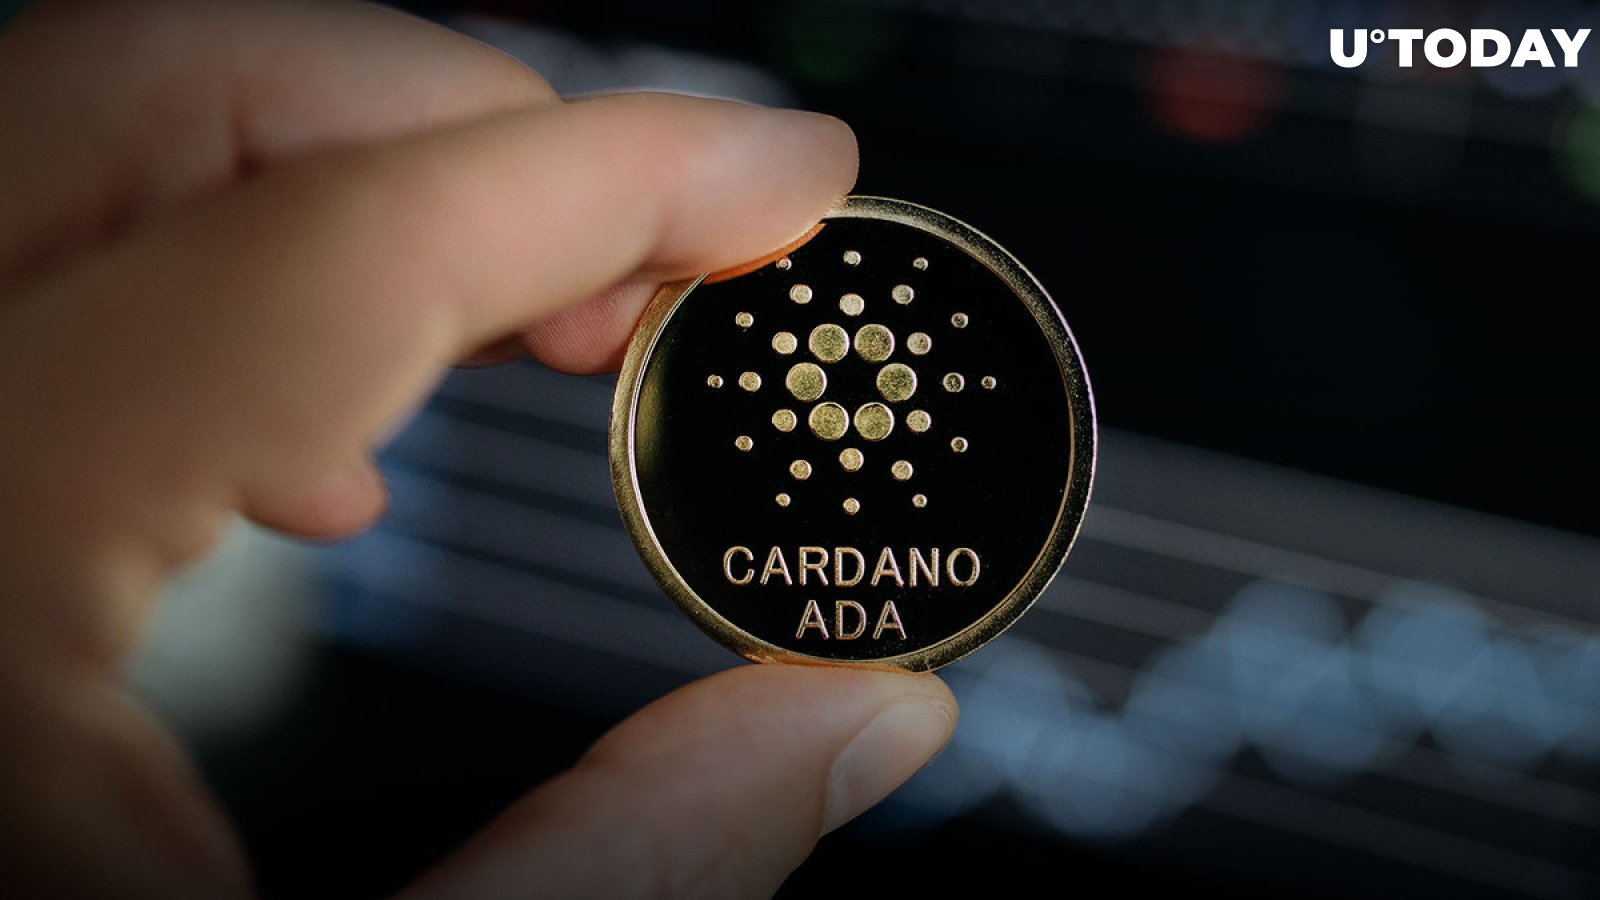 Cardano Vasil: Release of Latest Specification to Speed up Integration